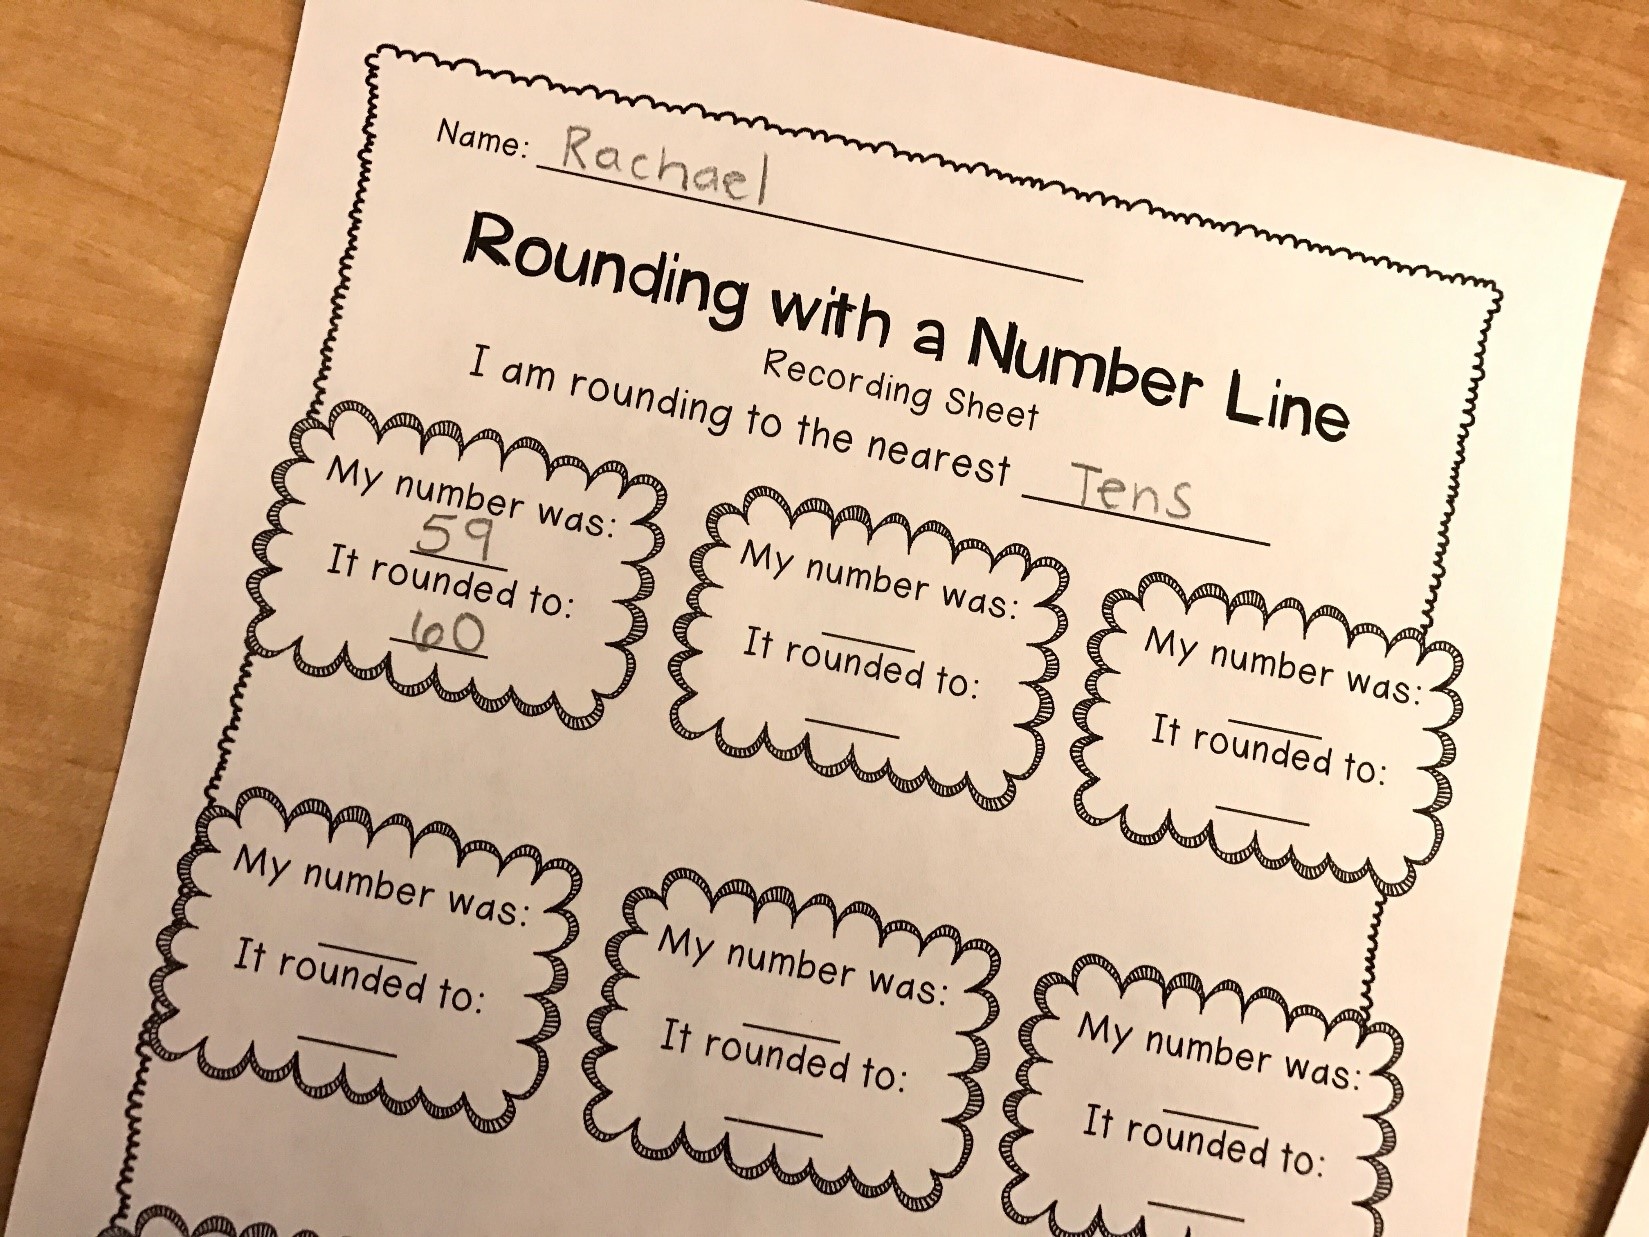 rounding with a number line